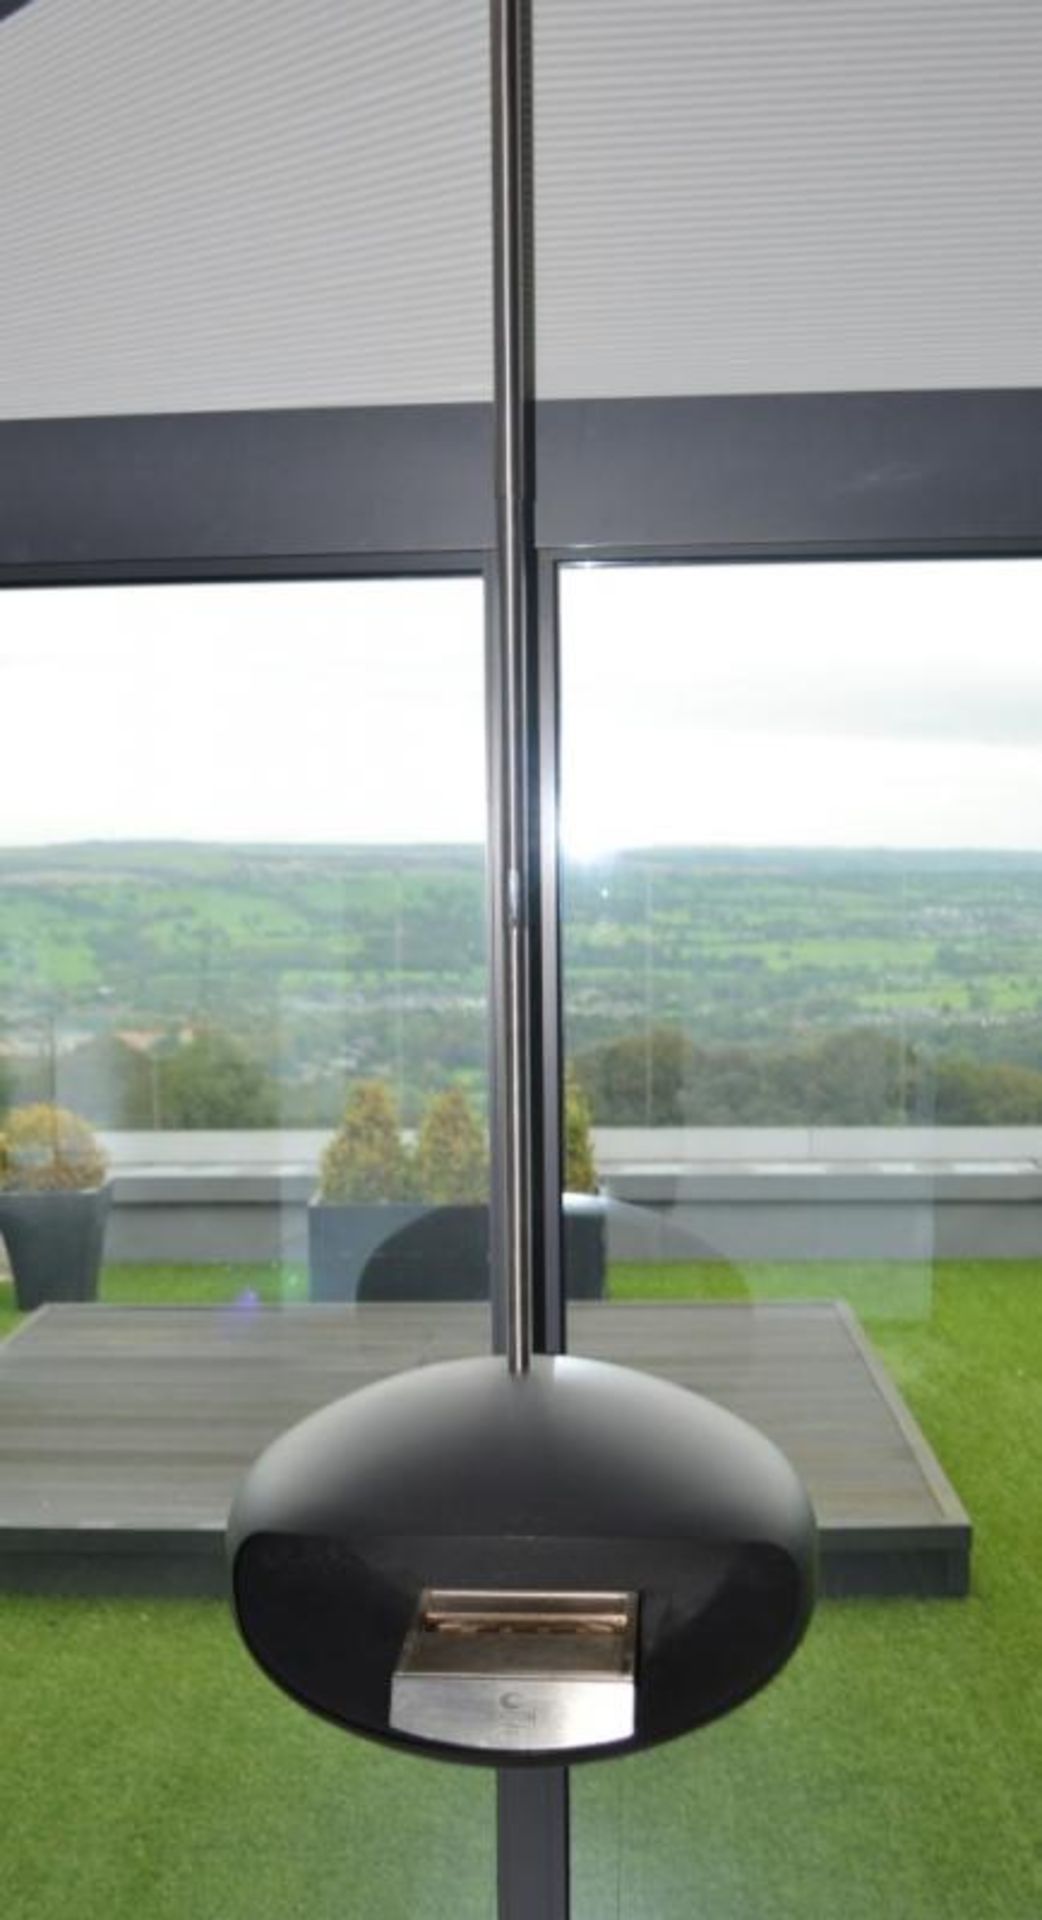 1 x Aeris Hanging Cocoon Fireplace Finished In Black - CL439 - Location: Ilkley LS29 - Used In Excel - Image 5 of 5